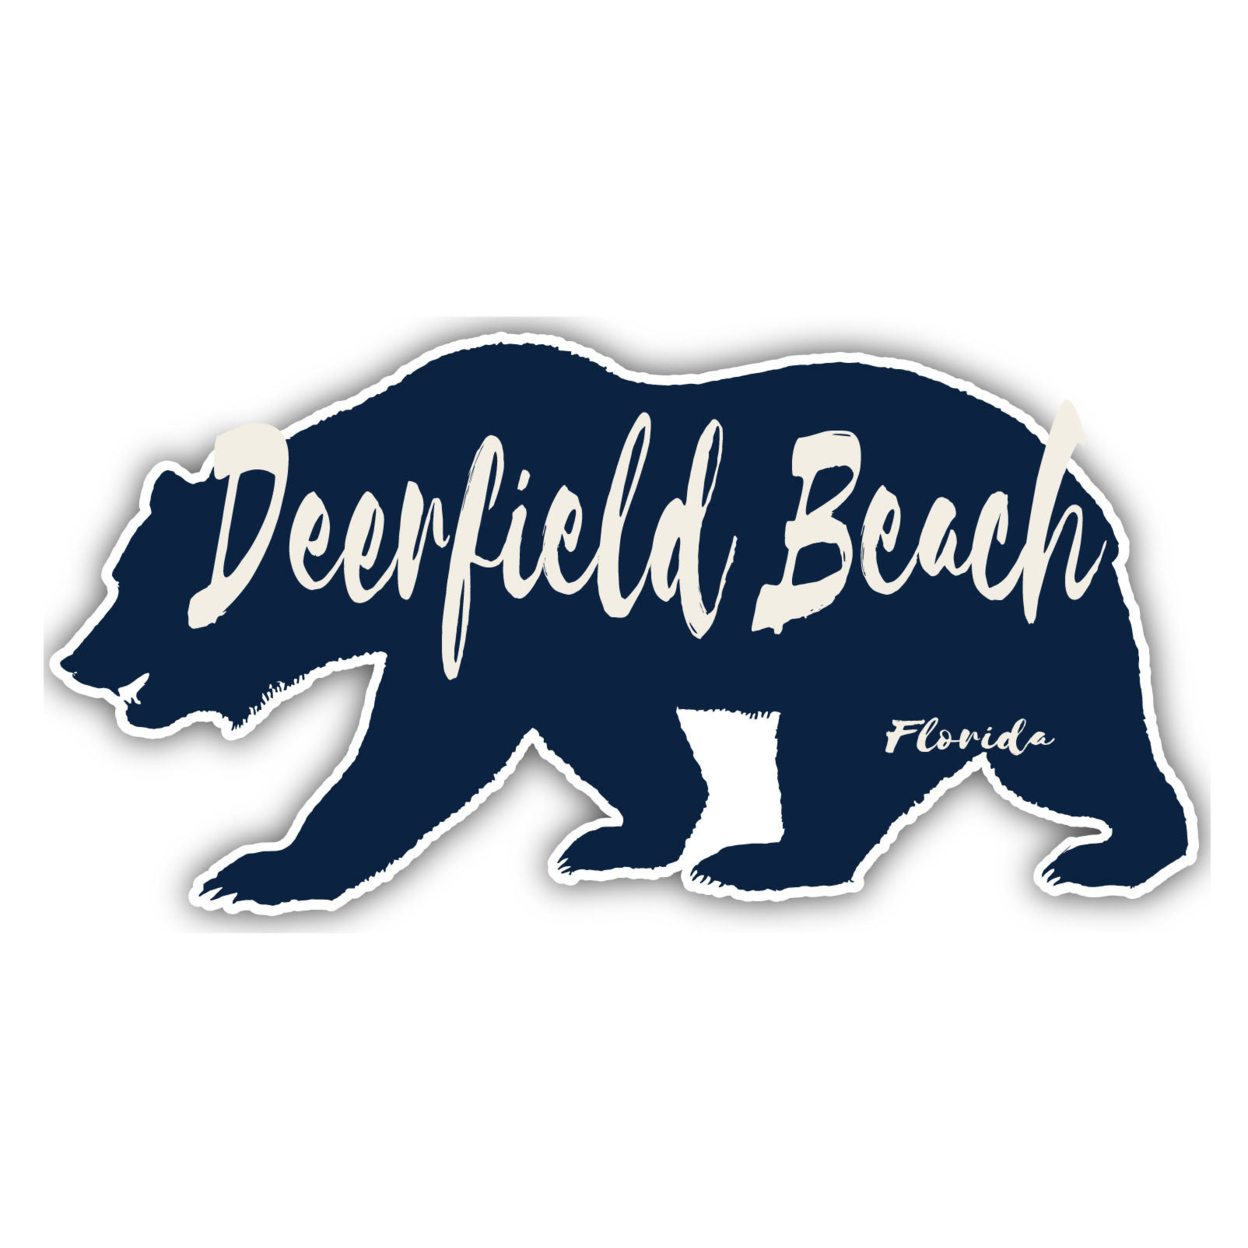 Deerfield Beach Florida Souvenir Decorative Stickers (Choose Theme And Size) - 4-Pack, 4-Inch, Great Outdoors